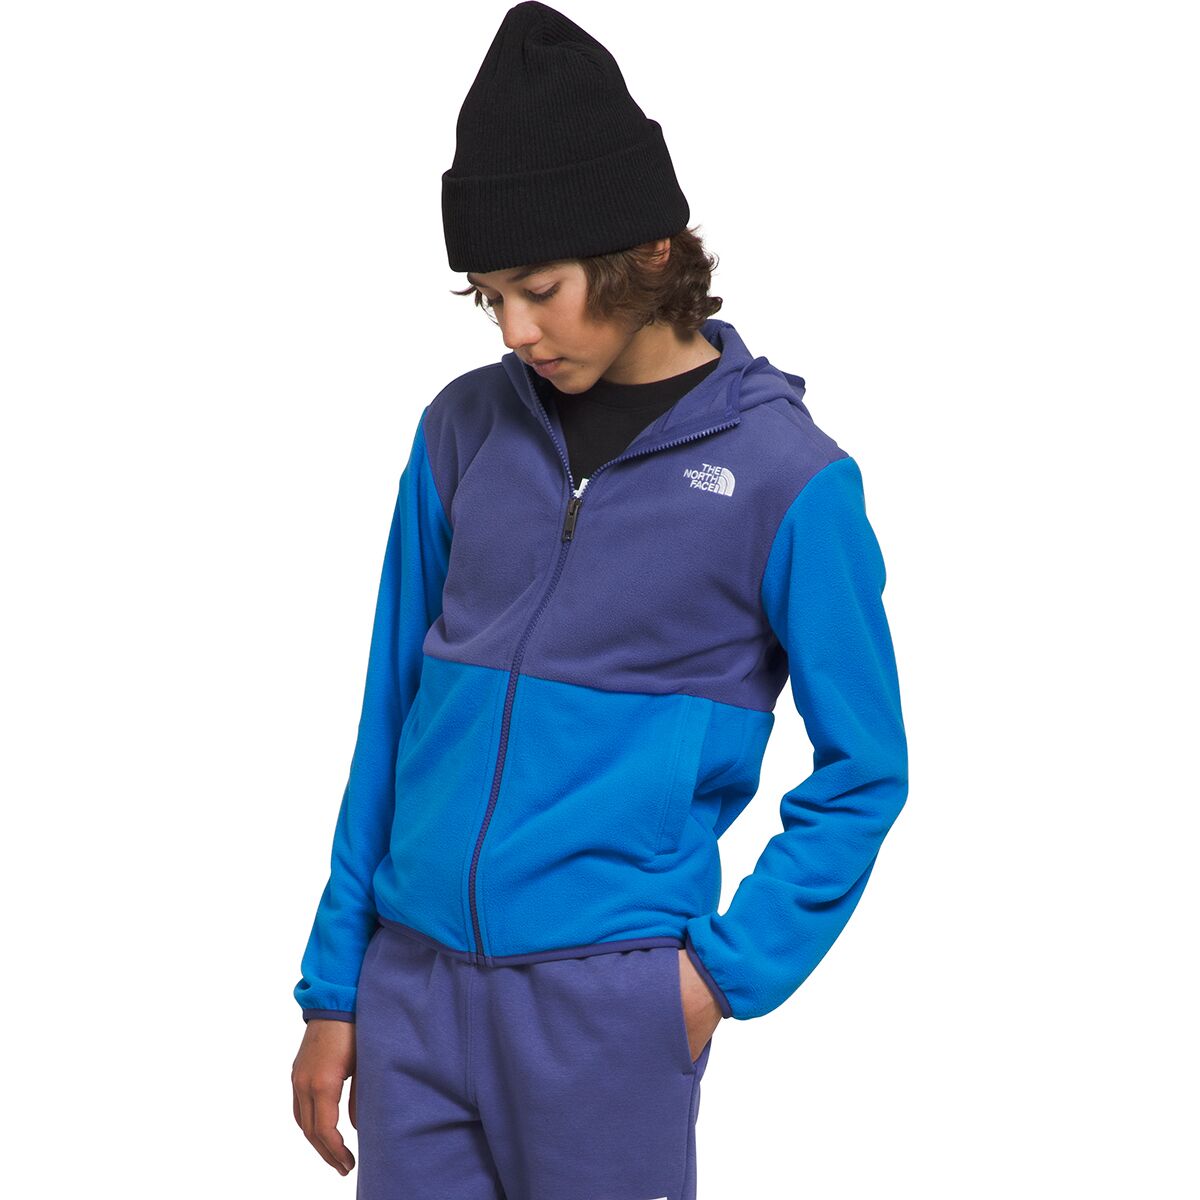 The North Face Glacier Full-Zip Hooded Jacket - Kids'